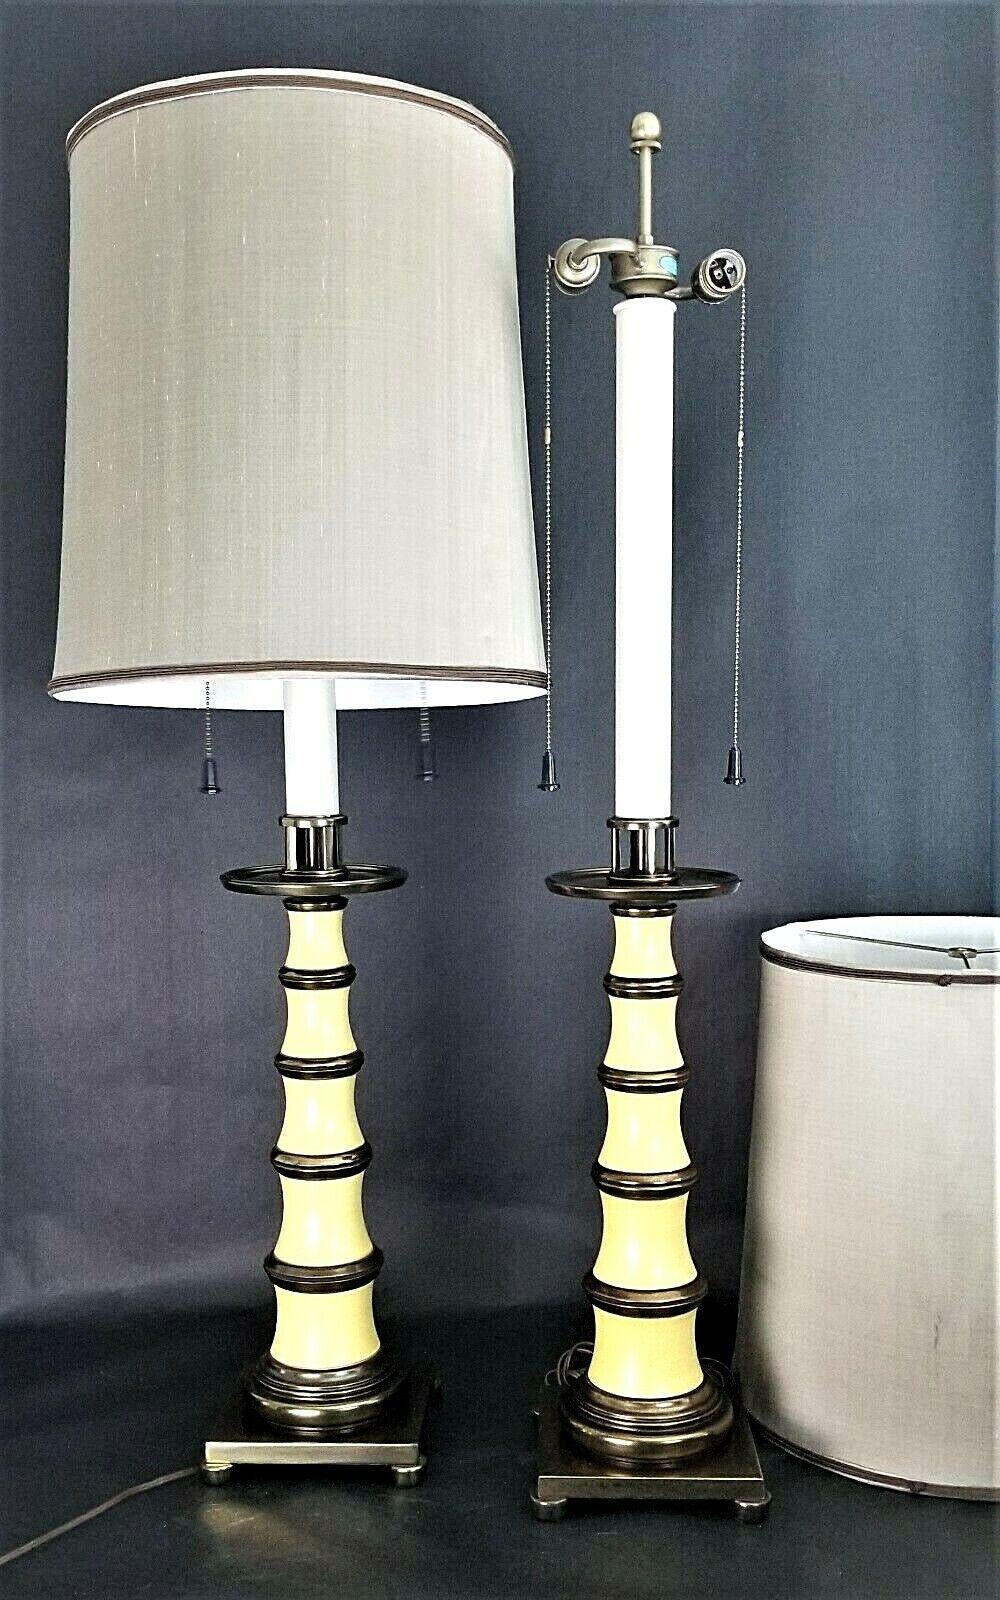 For FULL item description click on CONTINUE READING at the bottom of this page.

Offering One Of Our Recent Palm Beach Estate Fine Lighting Acquisitions Of A
Pair of Vintage Stiffel Enamel and Brass Candlestick Dual Socket Table Lamps with Dupioni